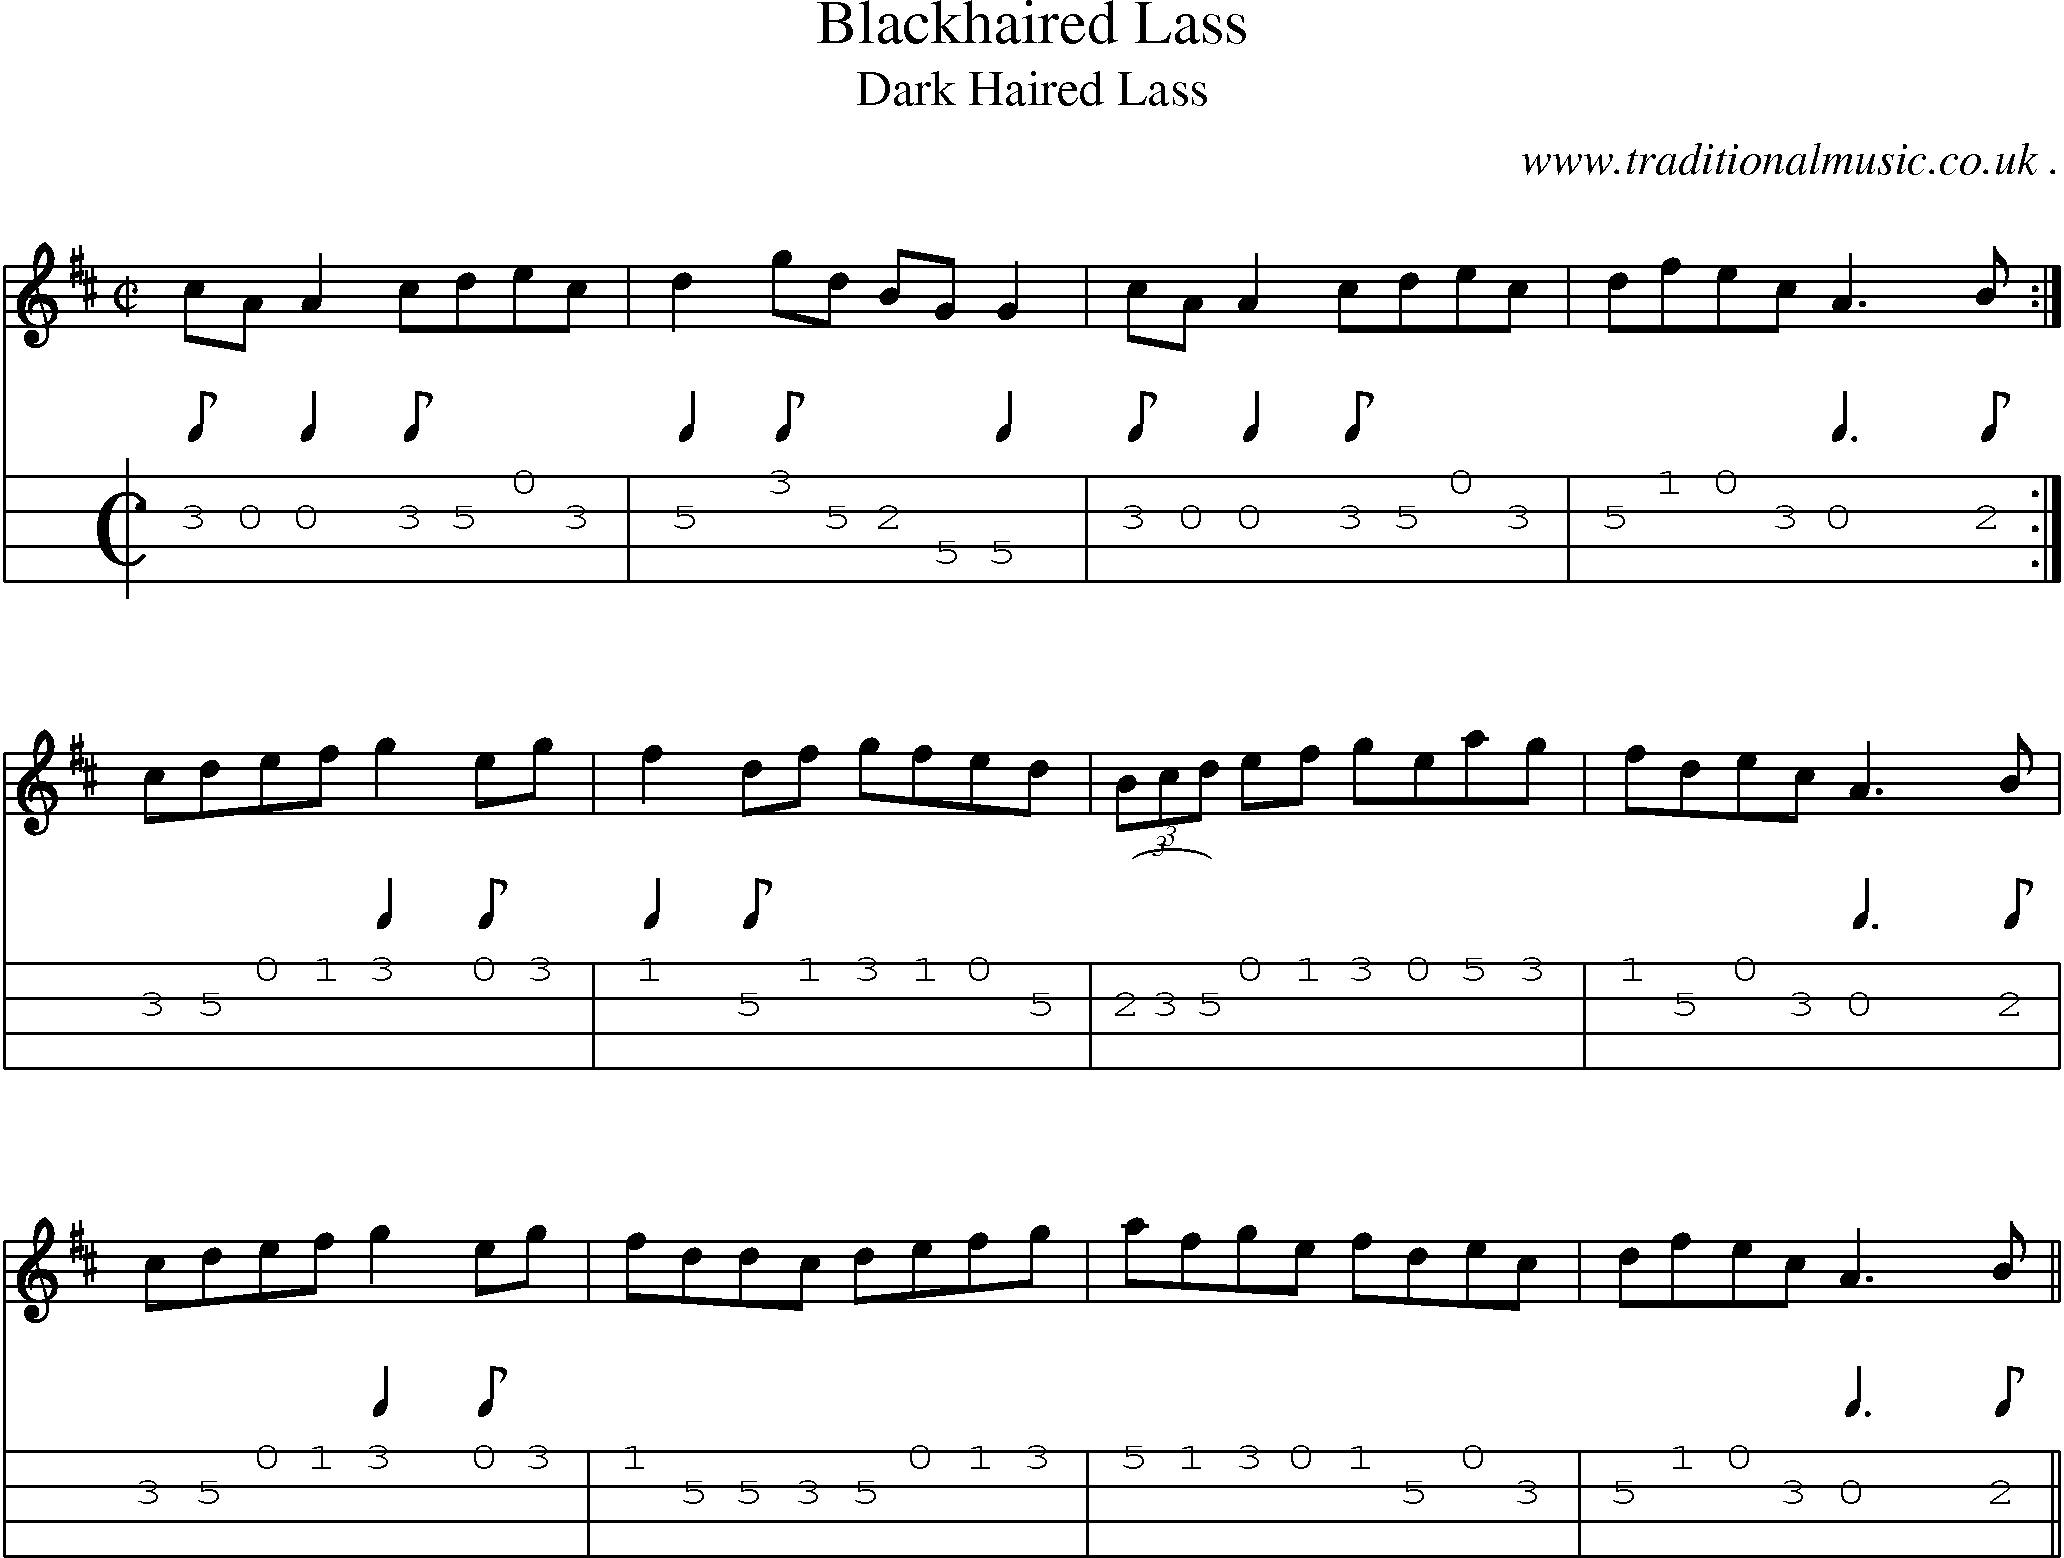 Sheet-Music and Mandolin Tabs for Blackhaired Lass